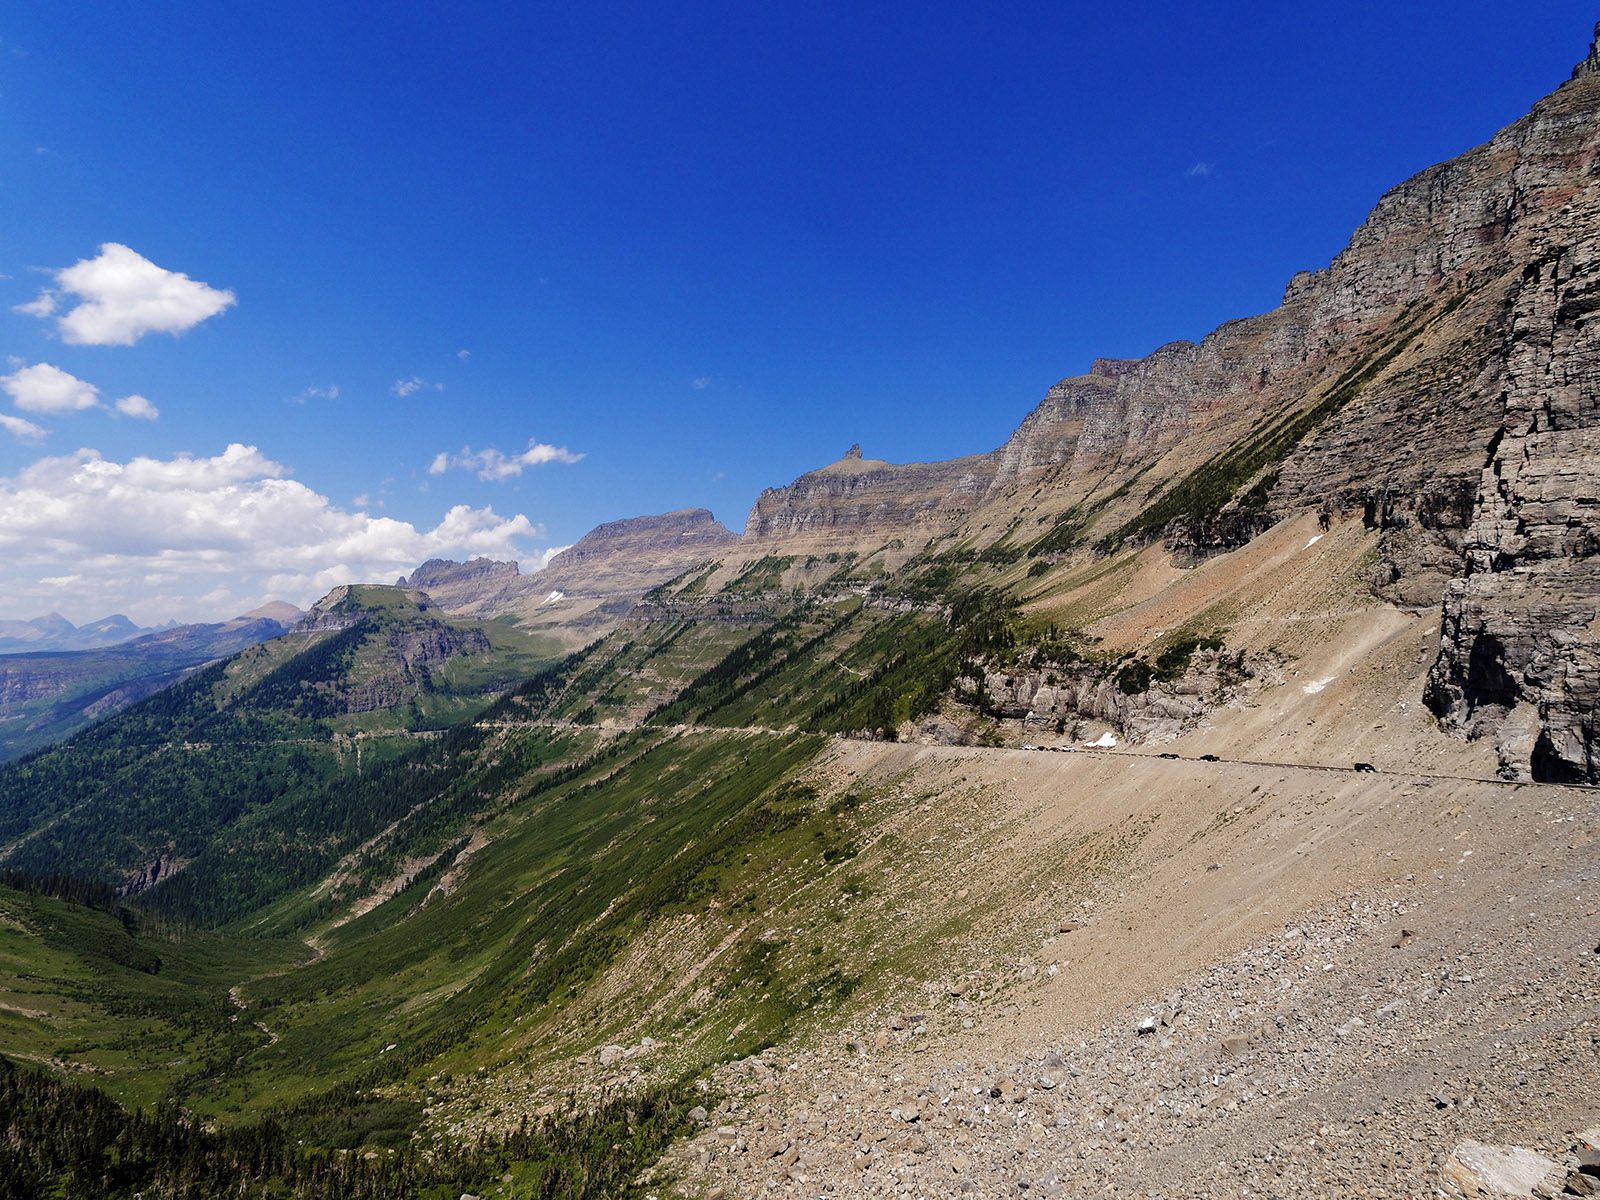 At the top of Going-to-the-Sun Road looking along the western ridge (Garden Wall) which was carved by glaciers.